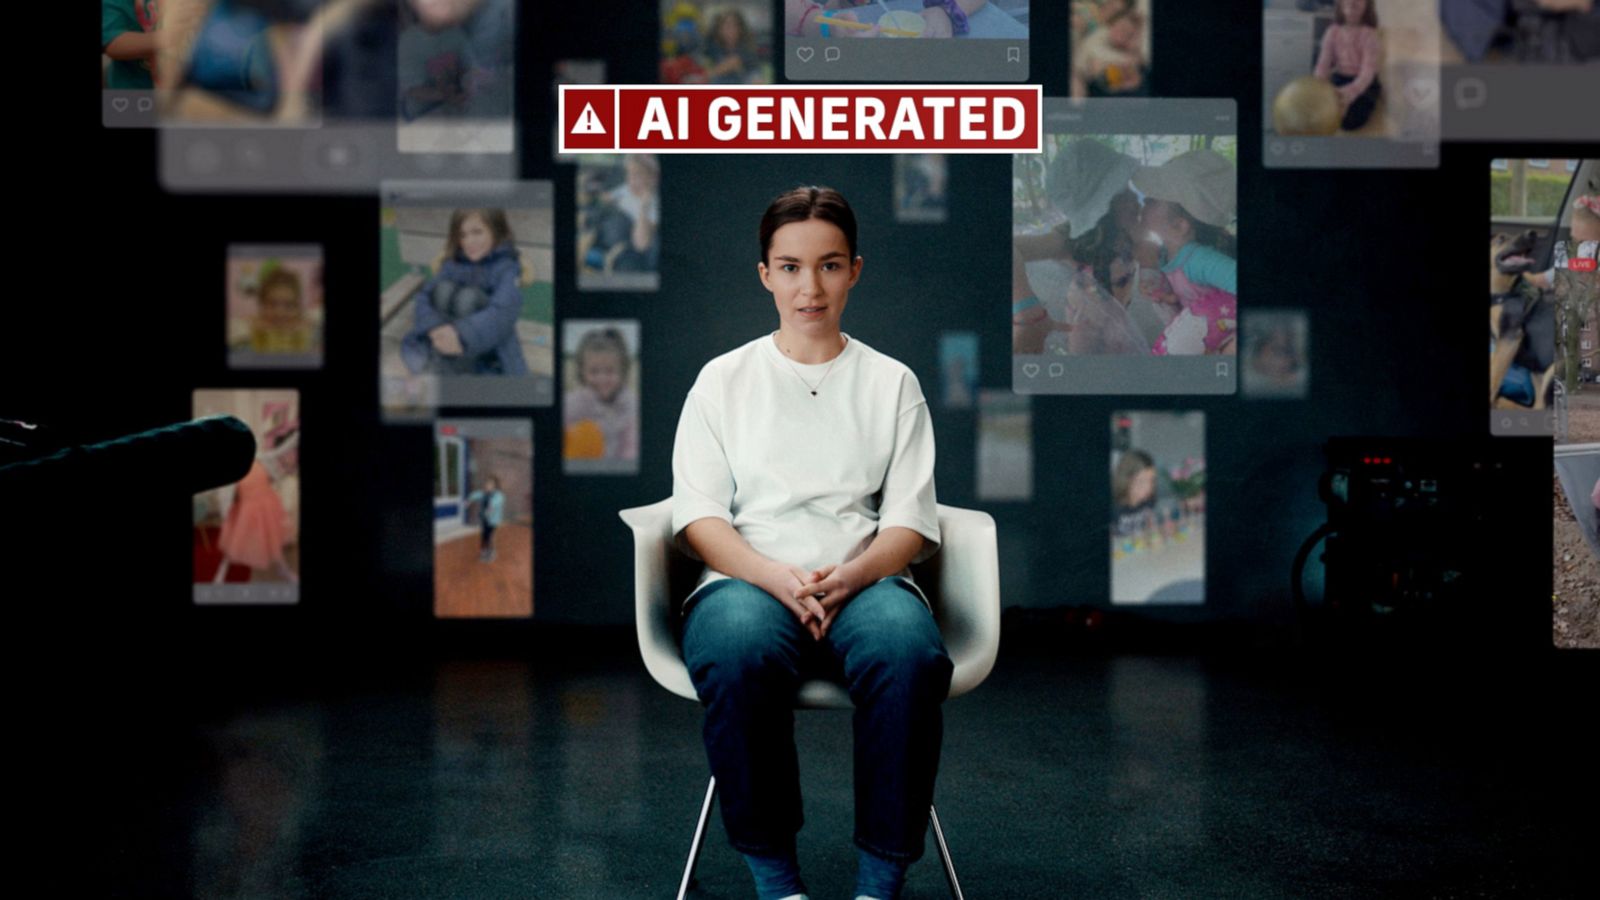 Sharing photos of your kids? Maybe not after you watch this deepfake ad